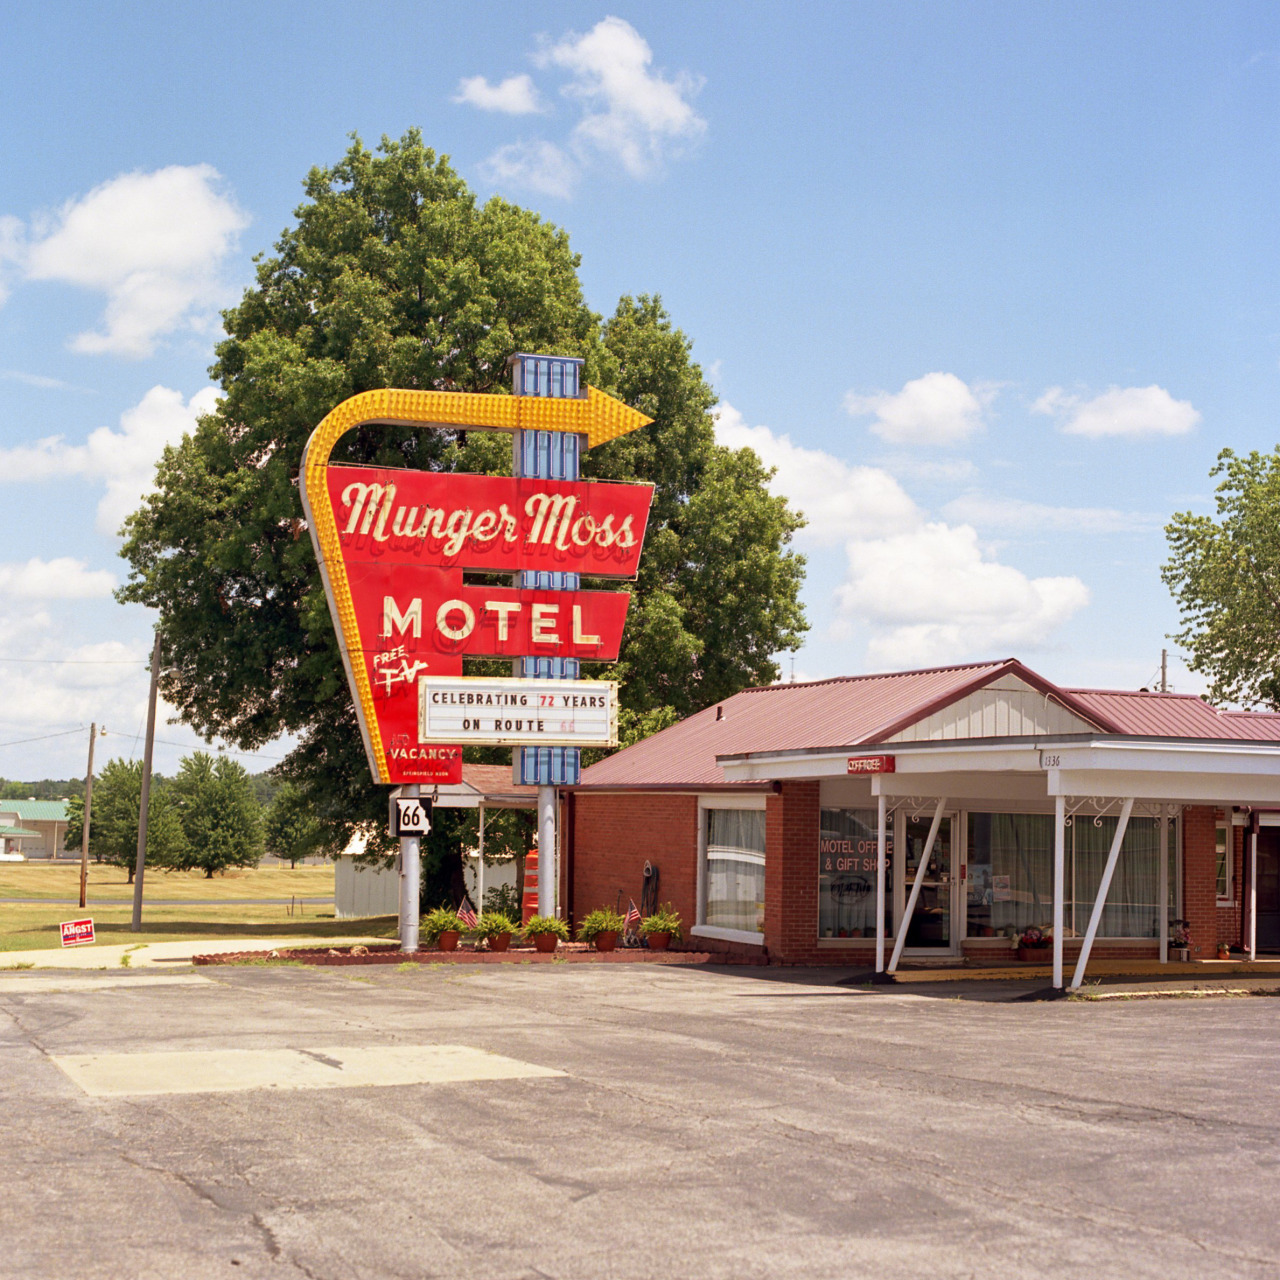 Another well-preserved Route 66 motel, the Munger Moss Motel in Lebanon offers travelers a glimpse into the past with its retro neon sign and vintage charm.]]>